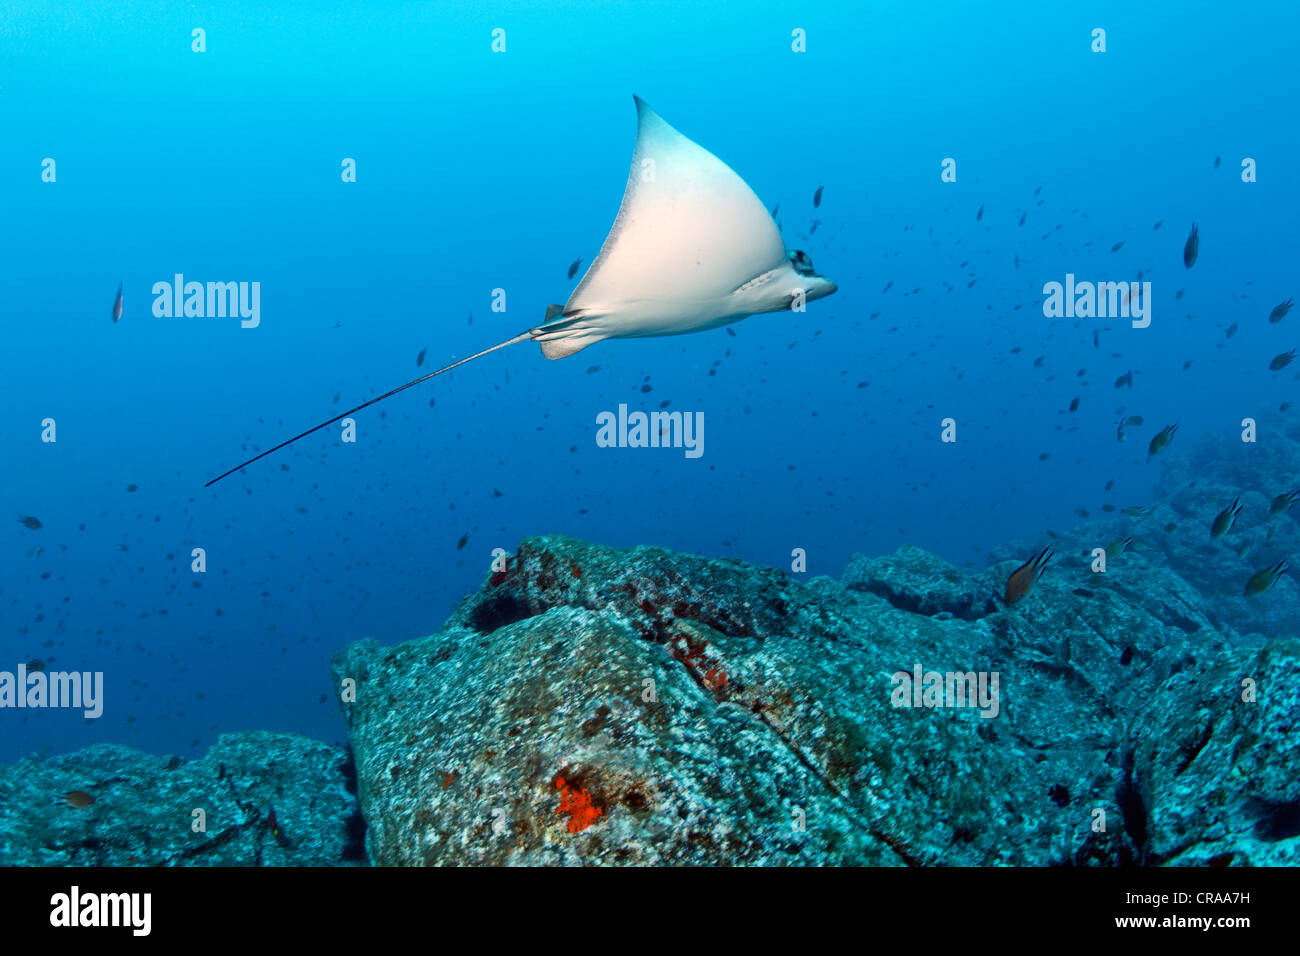 Common Eagle Ray (Myliobatis aquila), swimming above a rocky reef, Madeira, Portugal, Europe, Atlantic Ocean Stock Photo